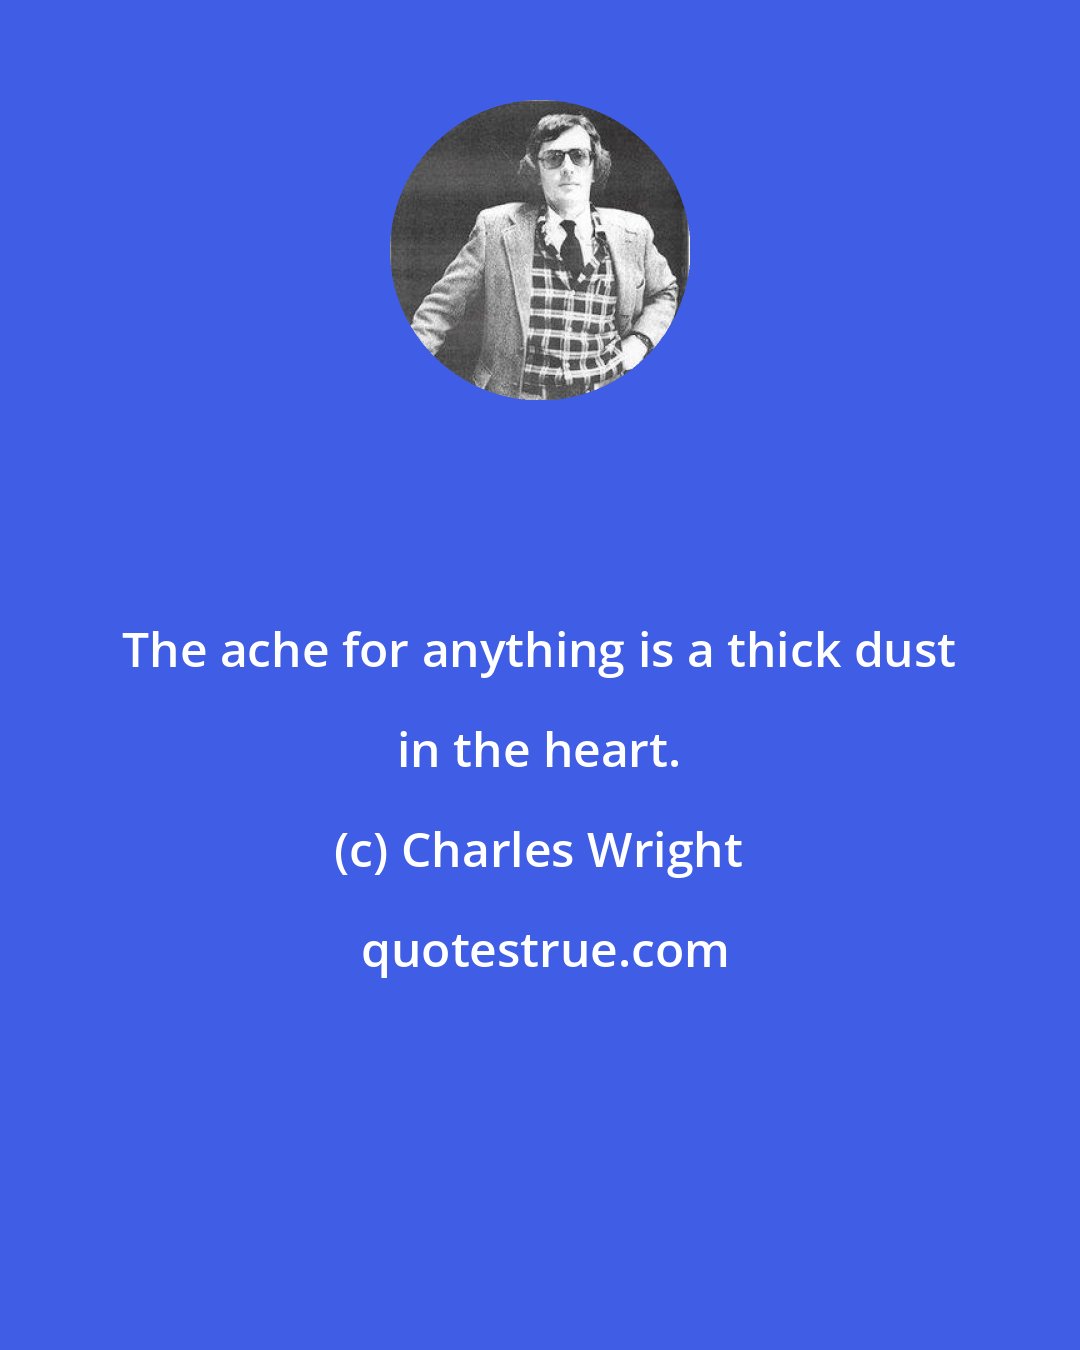 Charles Wright: The ache for anything is a thick dust in the heart.